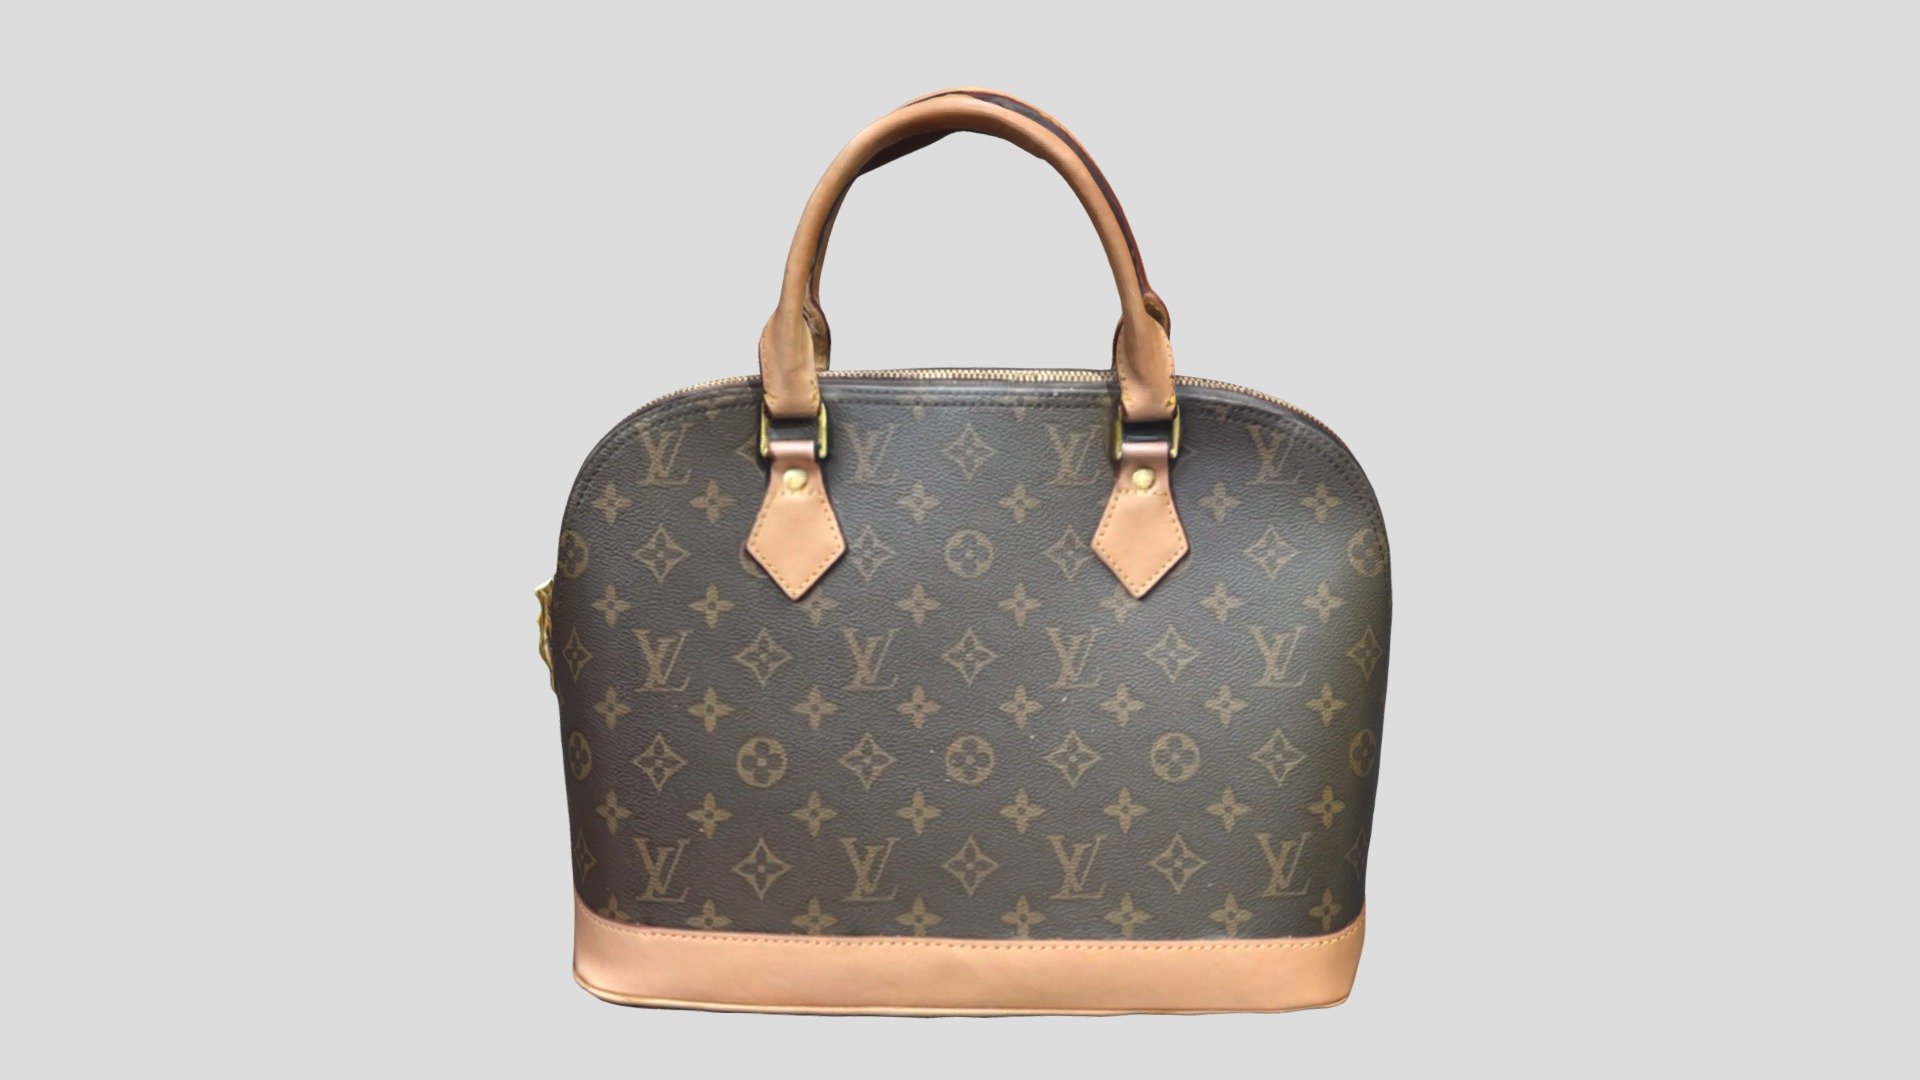 A 3D model of the iconic Louis Vuitton patterned handbag. Most likely a knock off. :) - Louis Vuitton Handbag - Buy Royalty Free 3D model by Marc Sawyer (@whitewashstudio) 3d model